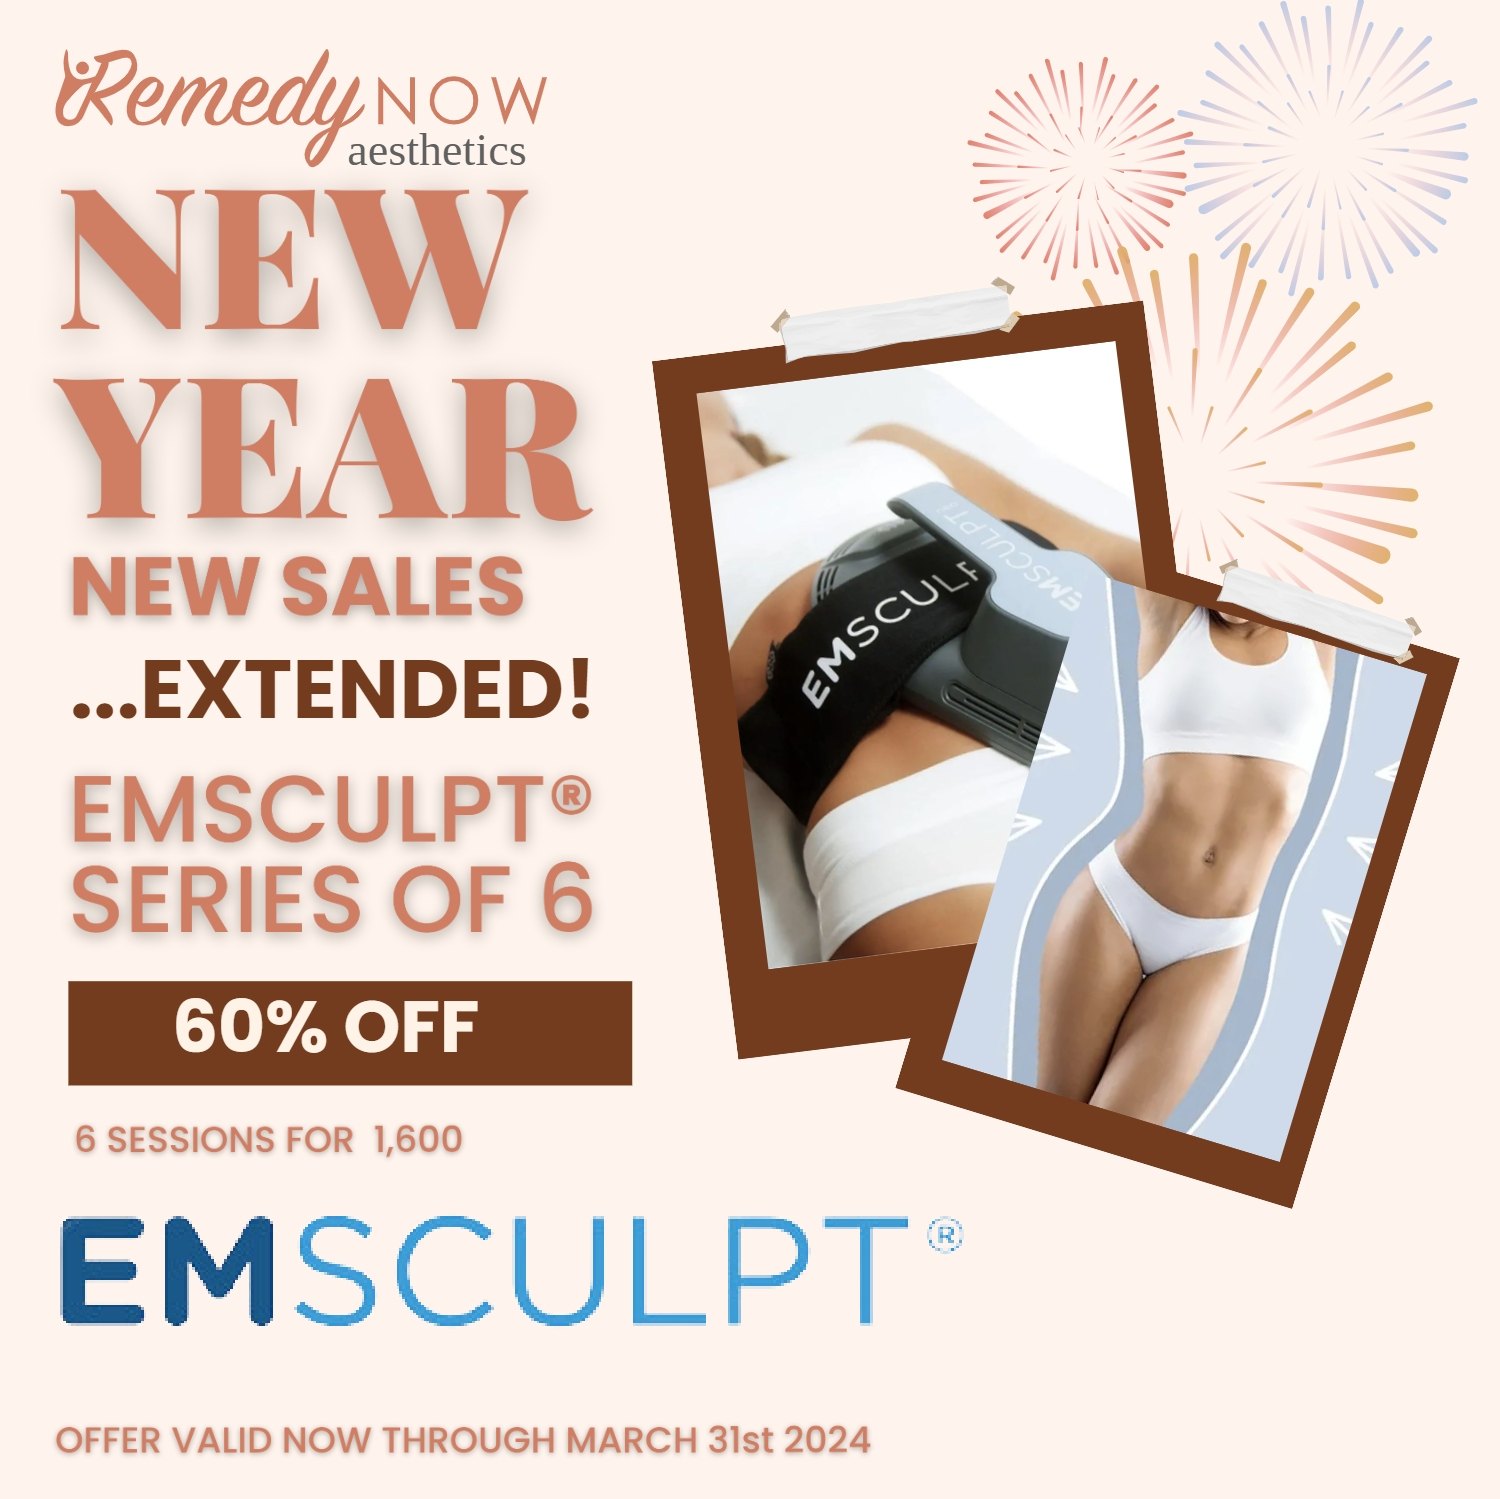 RemedyNow Aesthetics January Special Offer Part 1